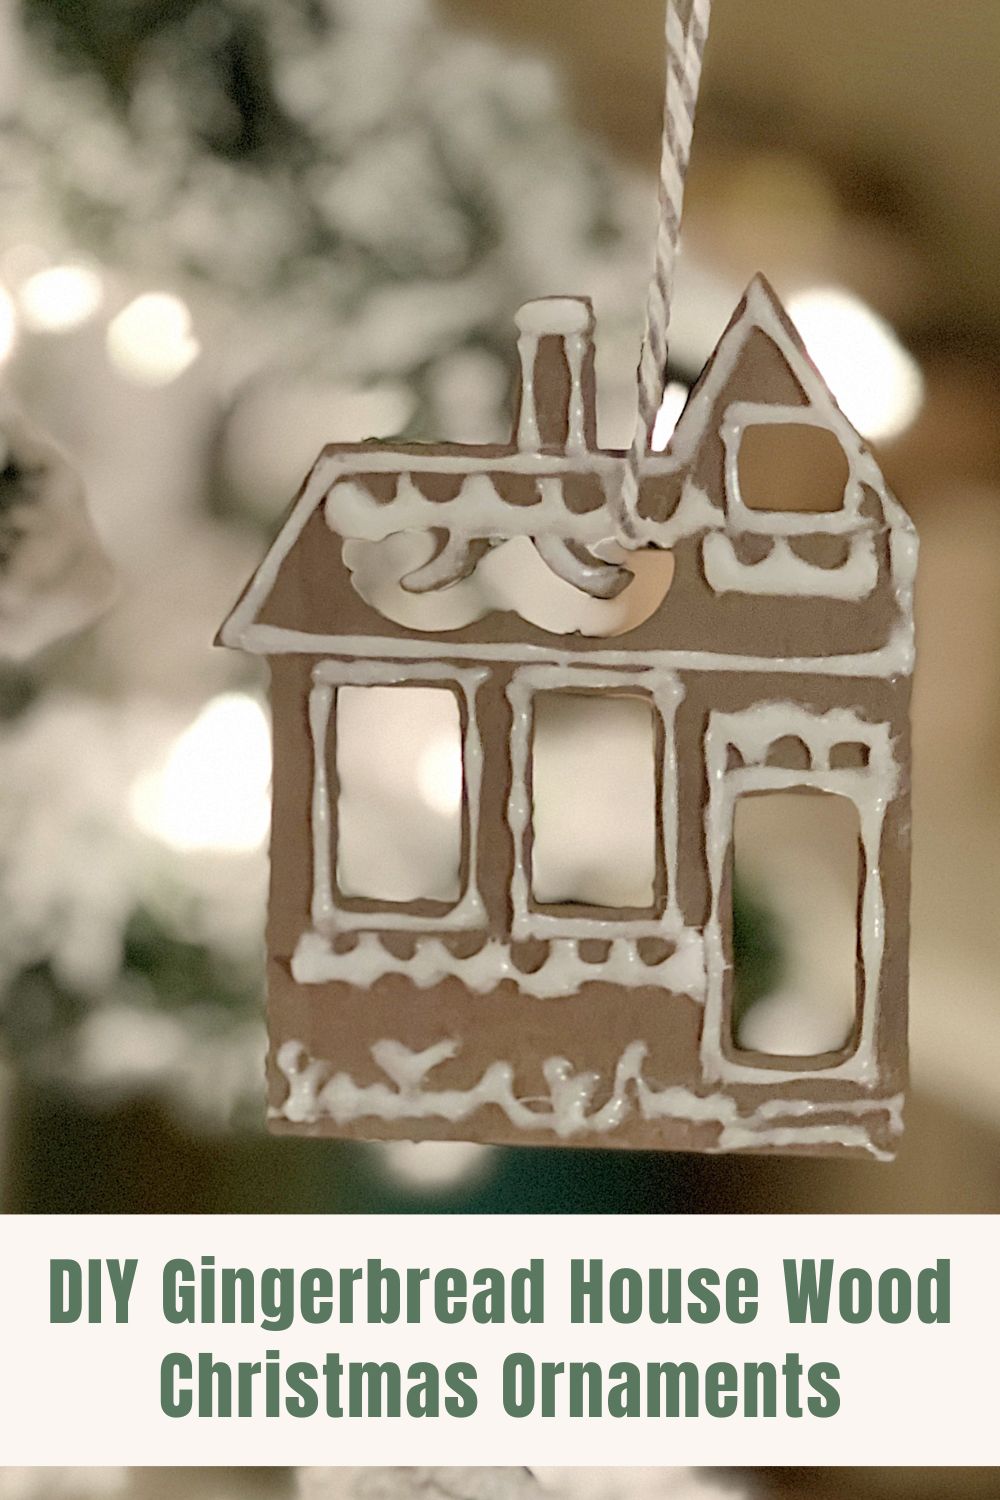 I love everything gingerbread. I love gingerbread lattes, cookies, and cake. The gingerbread house wood Christmas ornaments are so much fun!